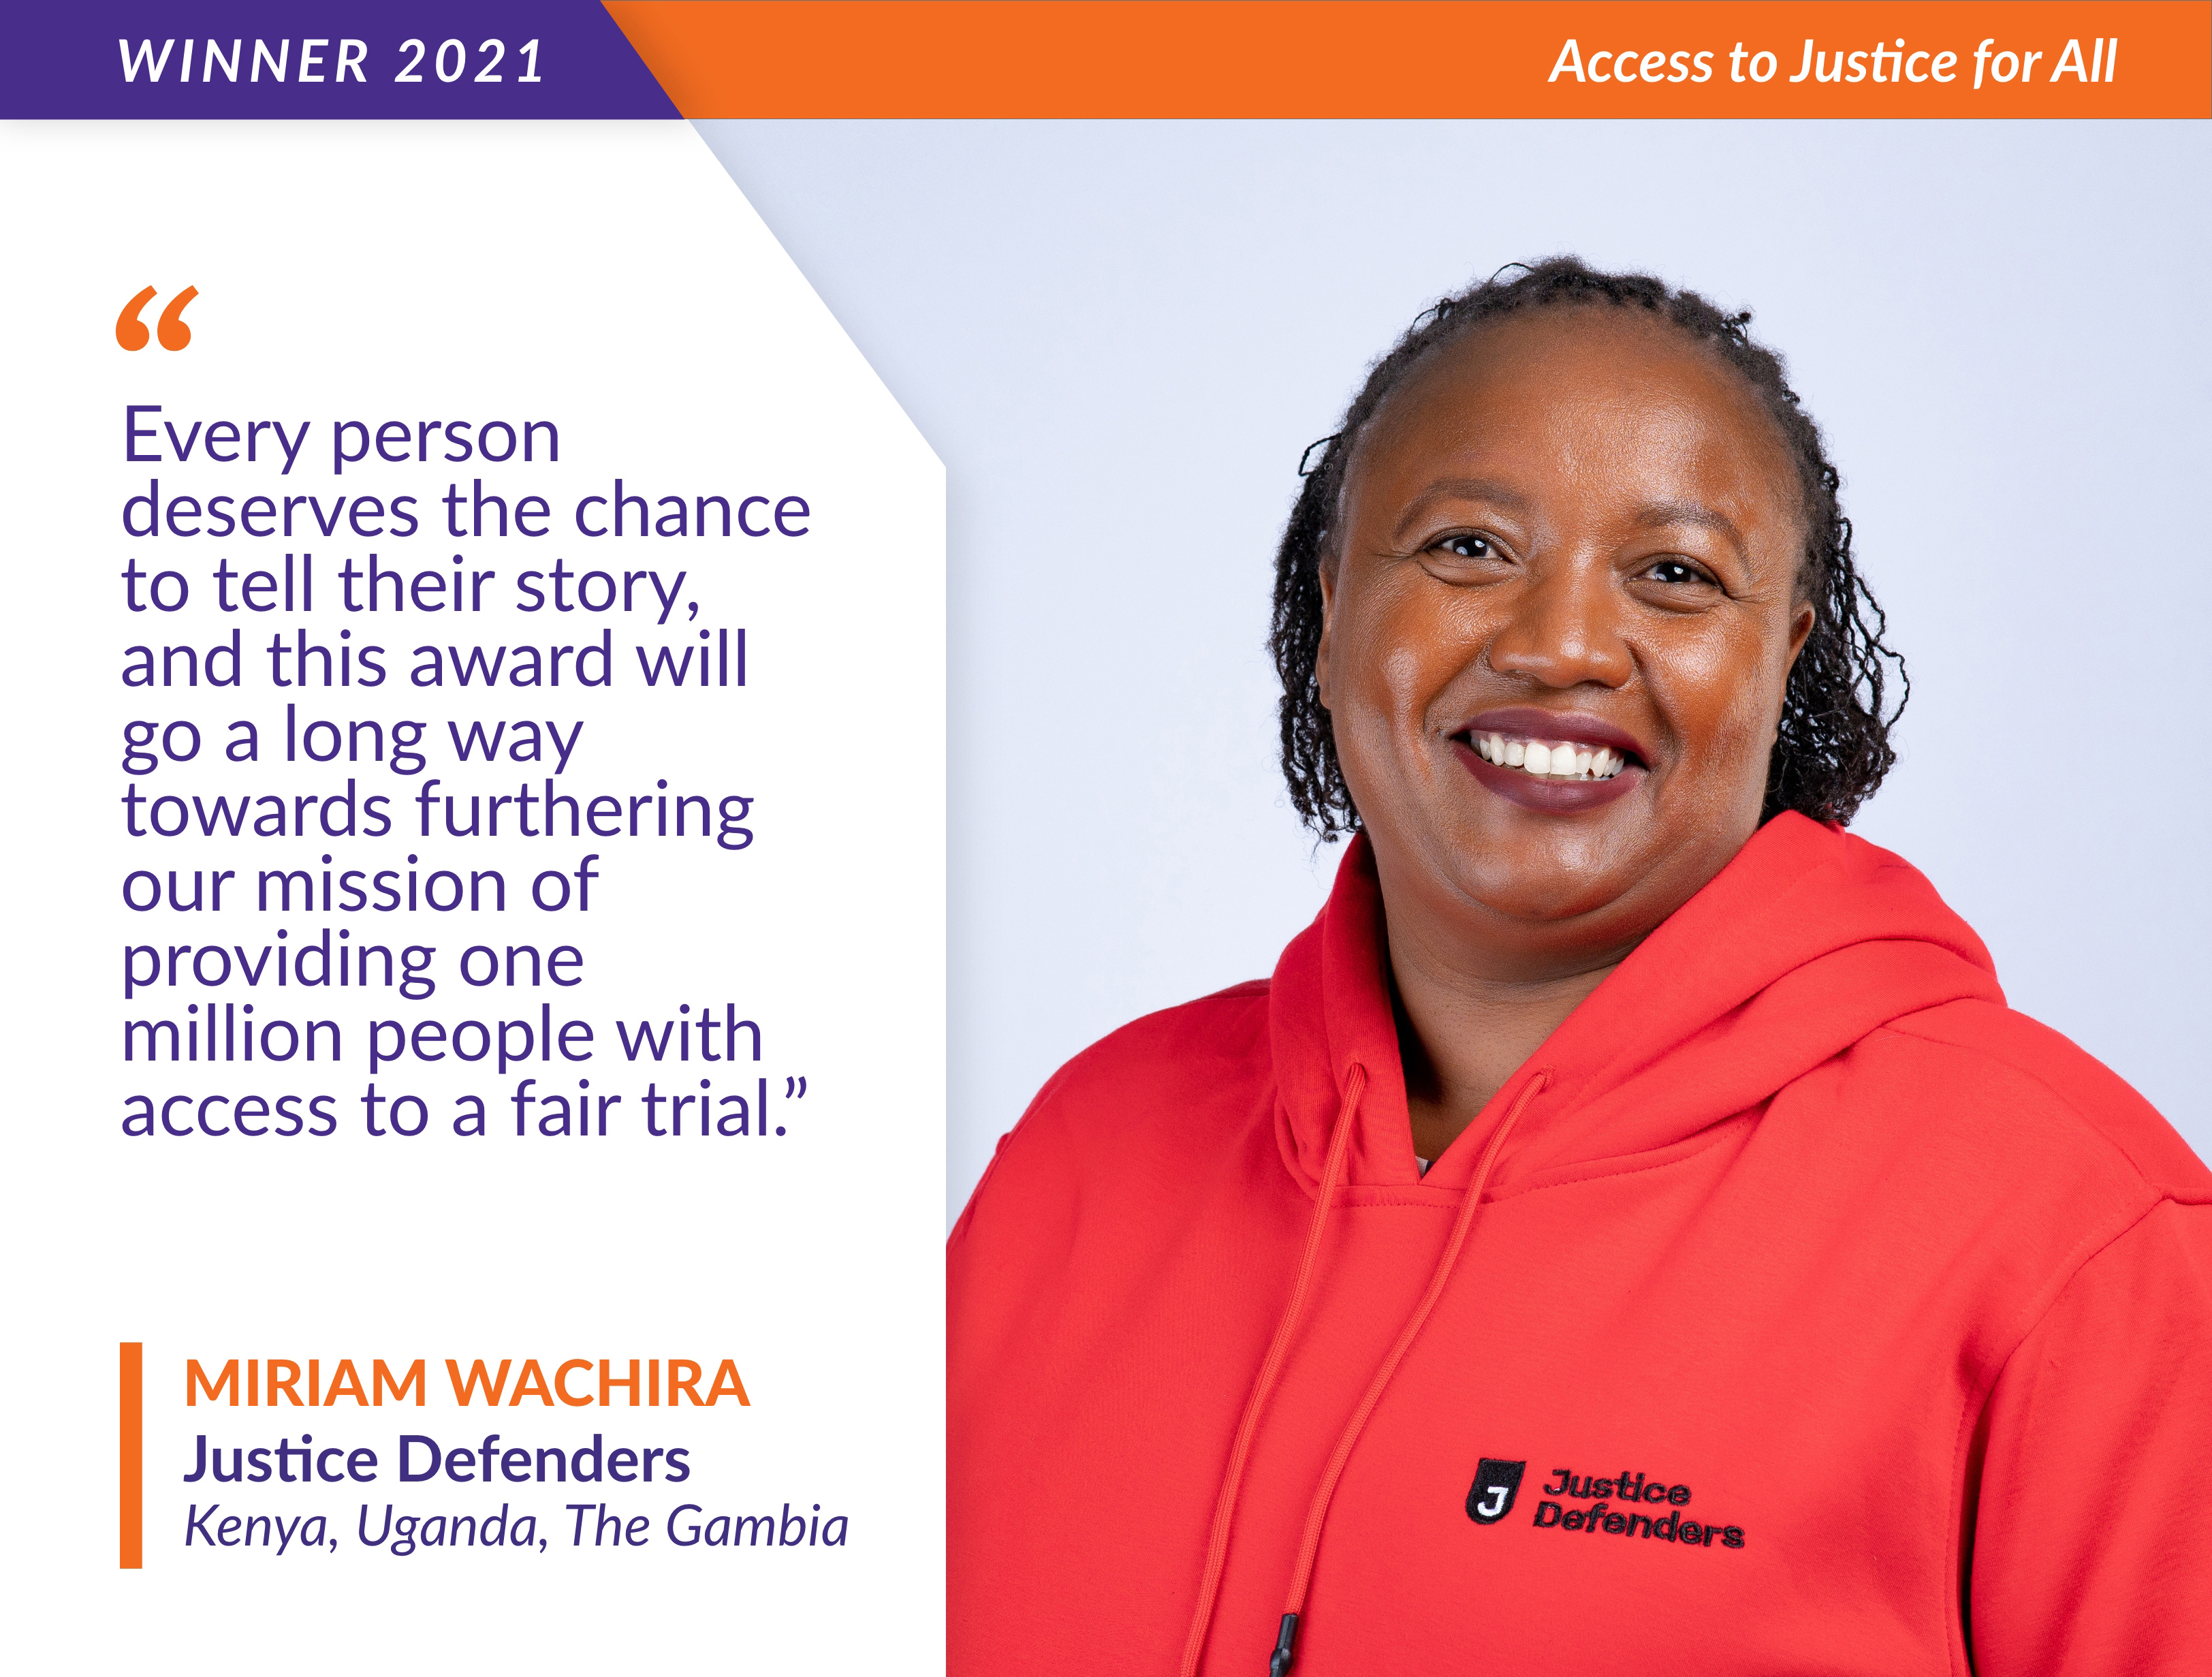 Miriam Wachira from Justice Defenders shares a testimonial about the World Justice Challenge